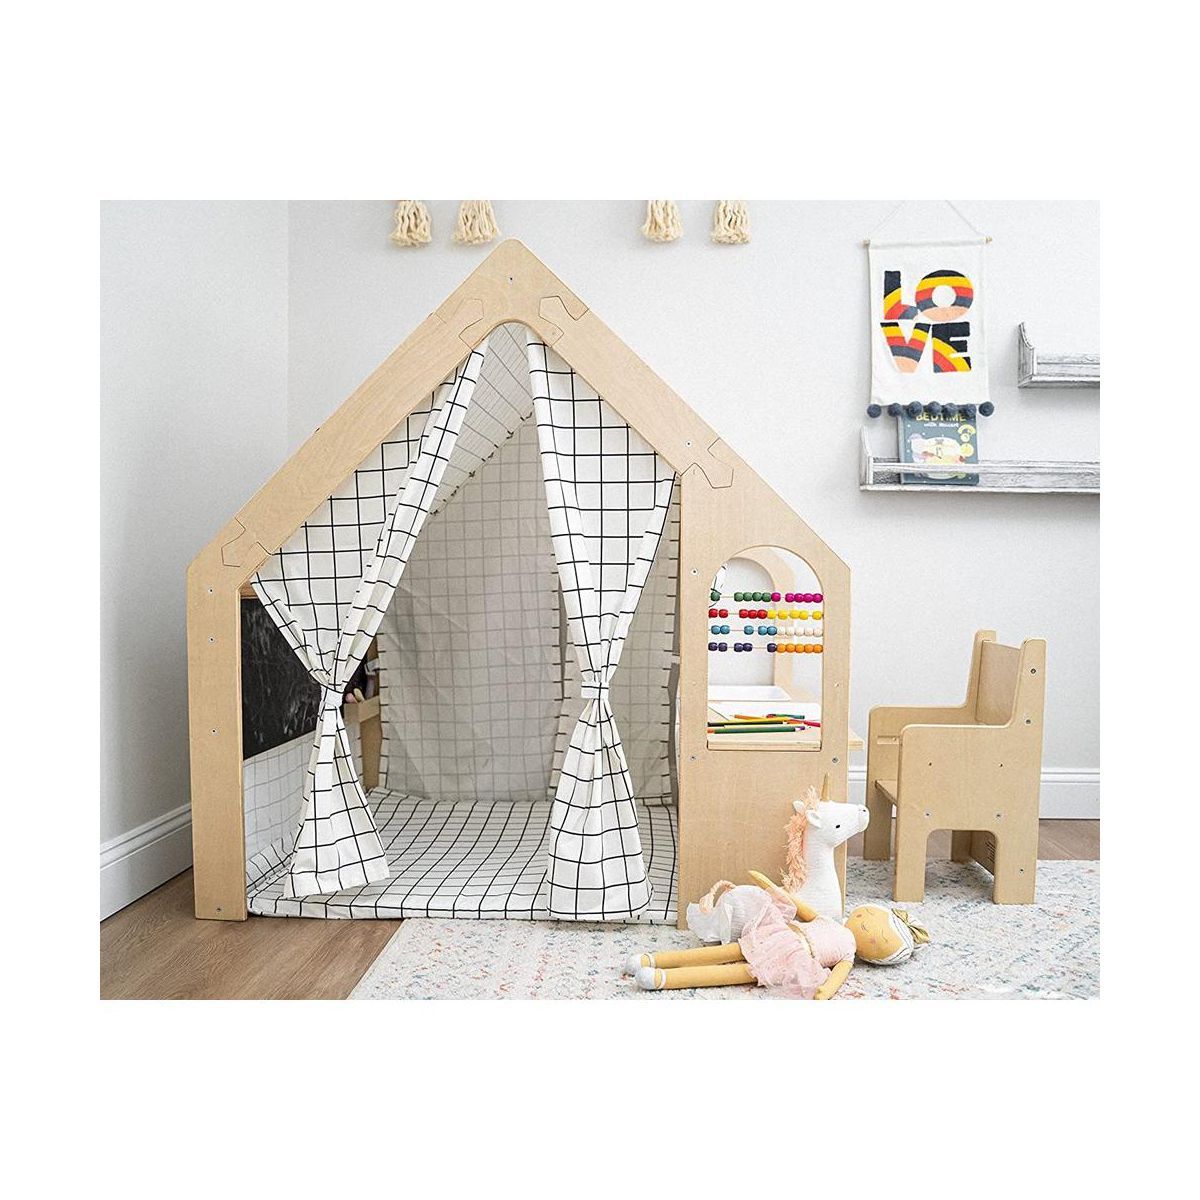 Avenlur Flair - Wooden 5 In 1 Indoor Playhouse Play Tent with Desk Table | Target